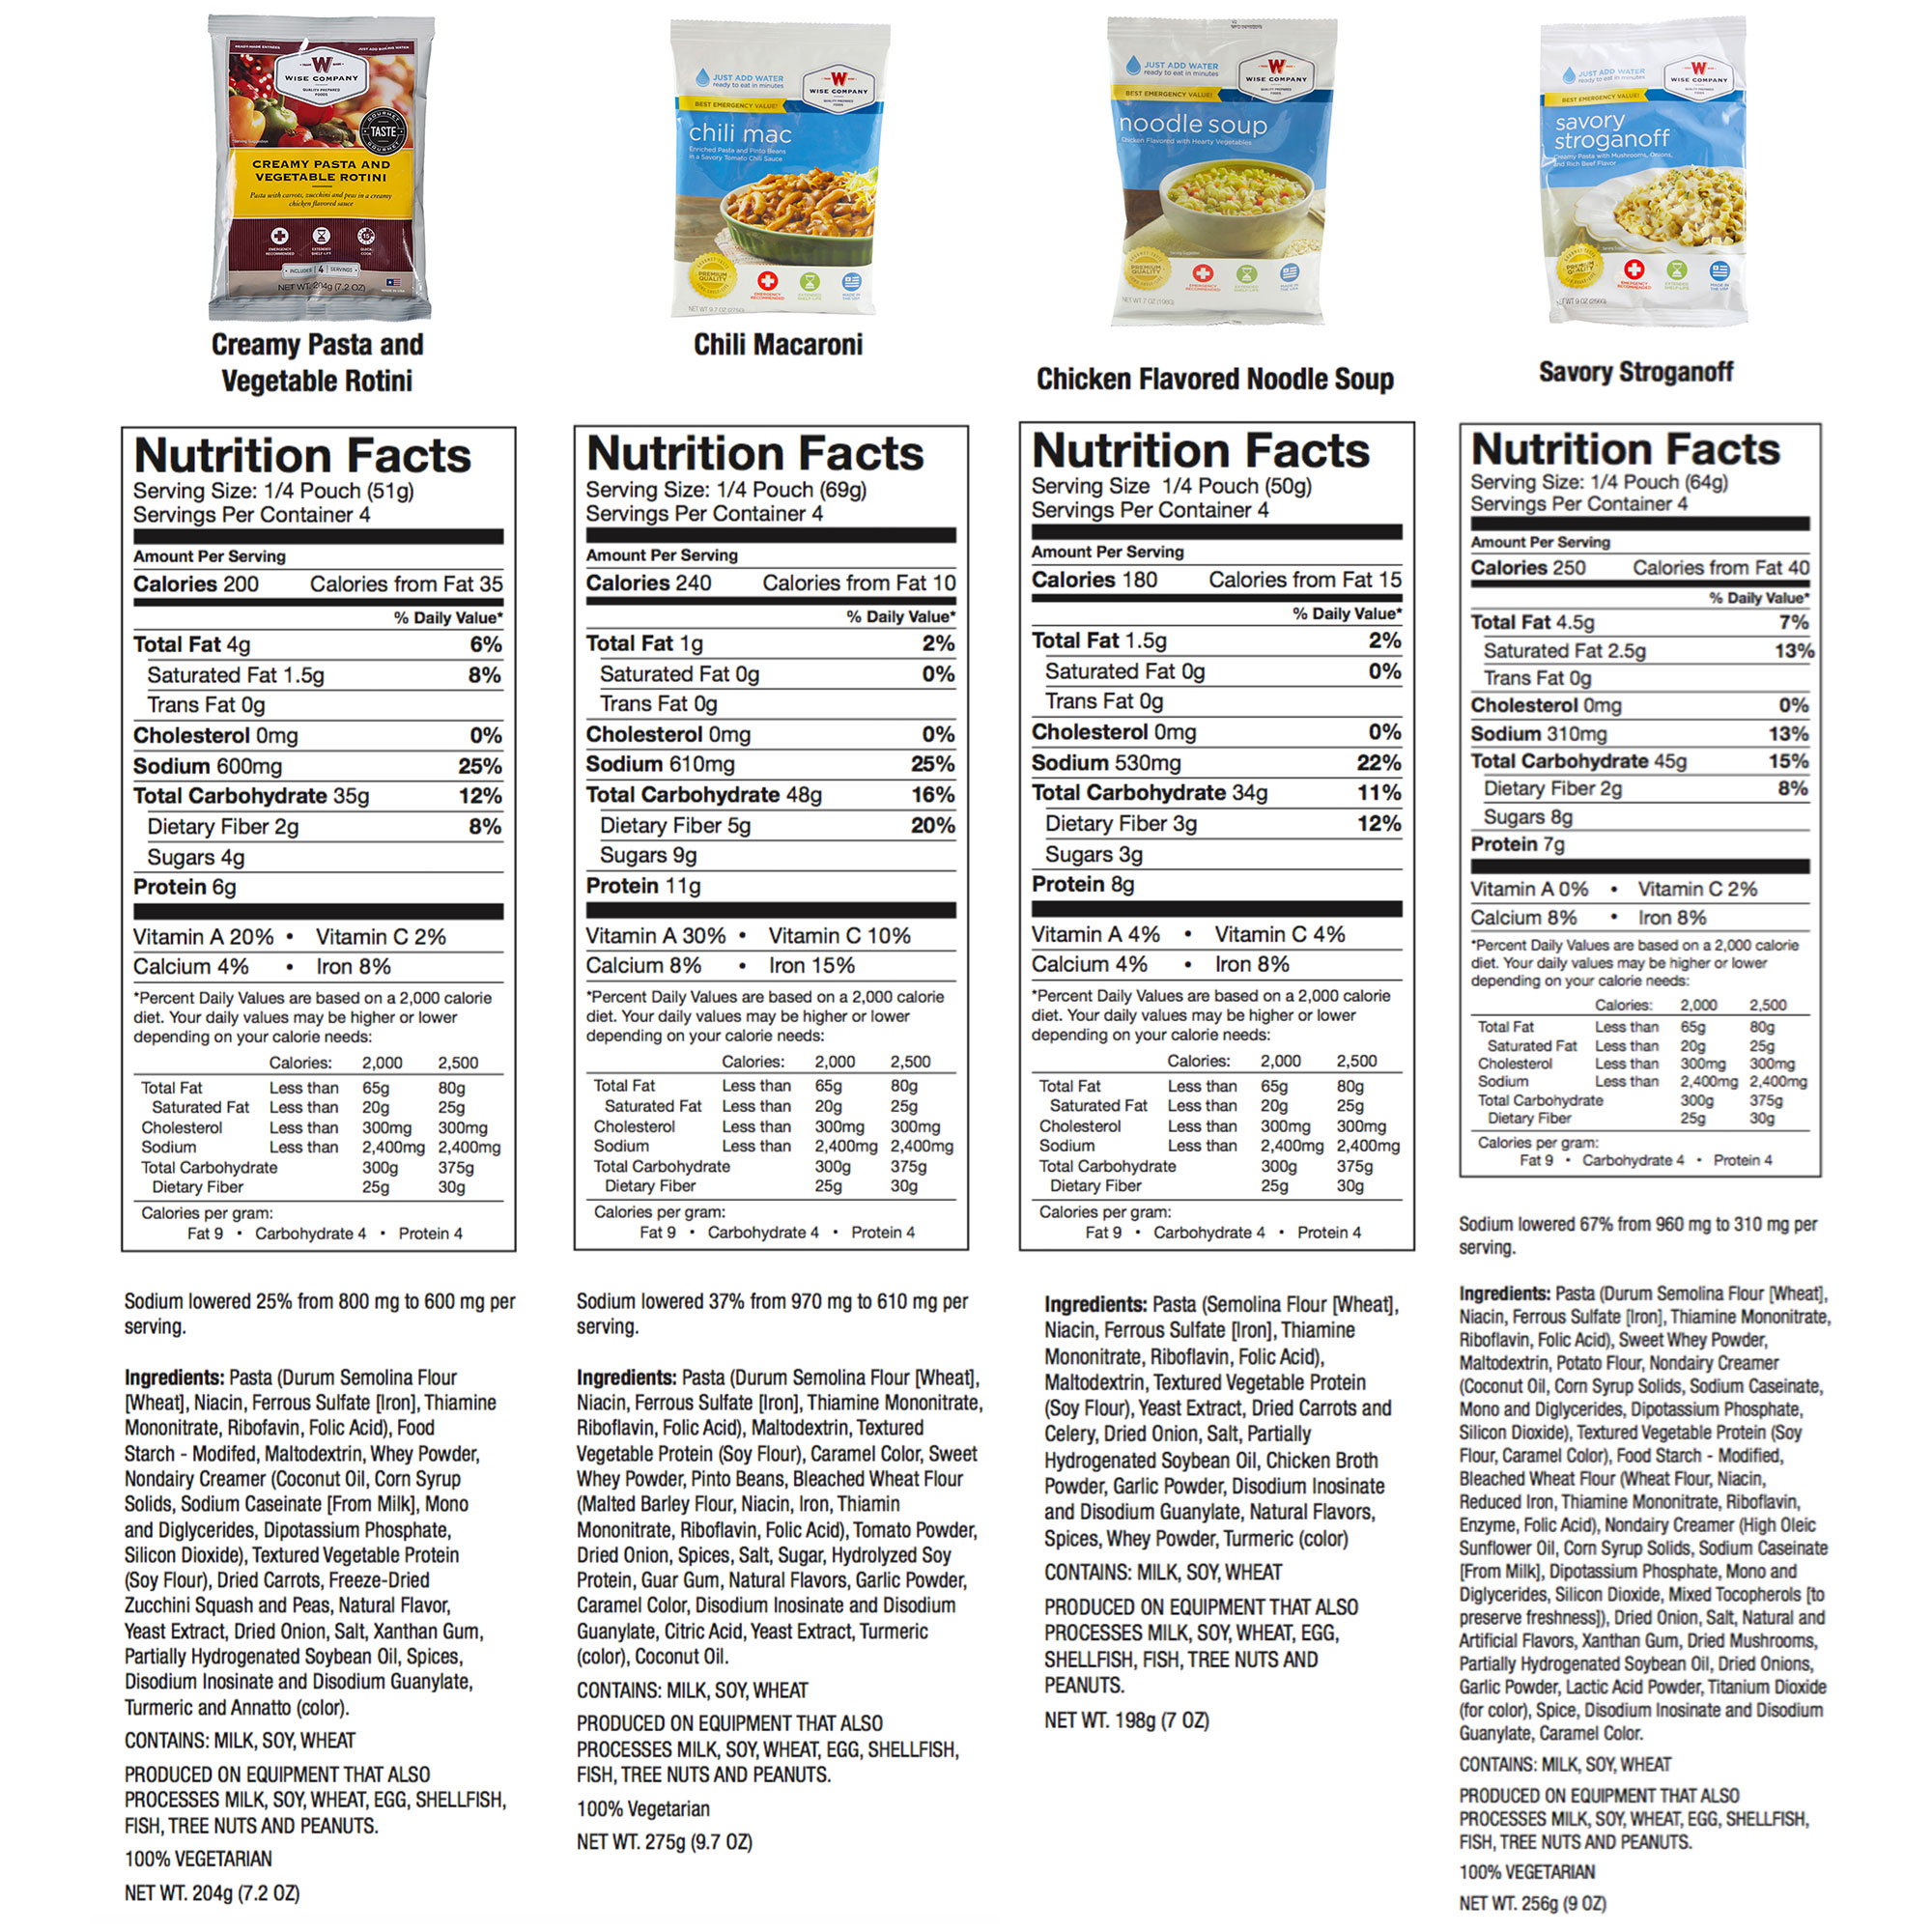 nutrition_1-2.jpg.pagespeed.ce.RtYb_X9t1K